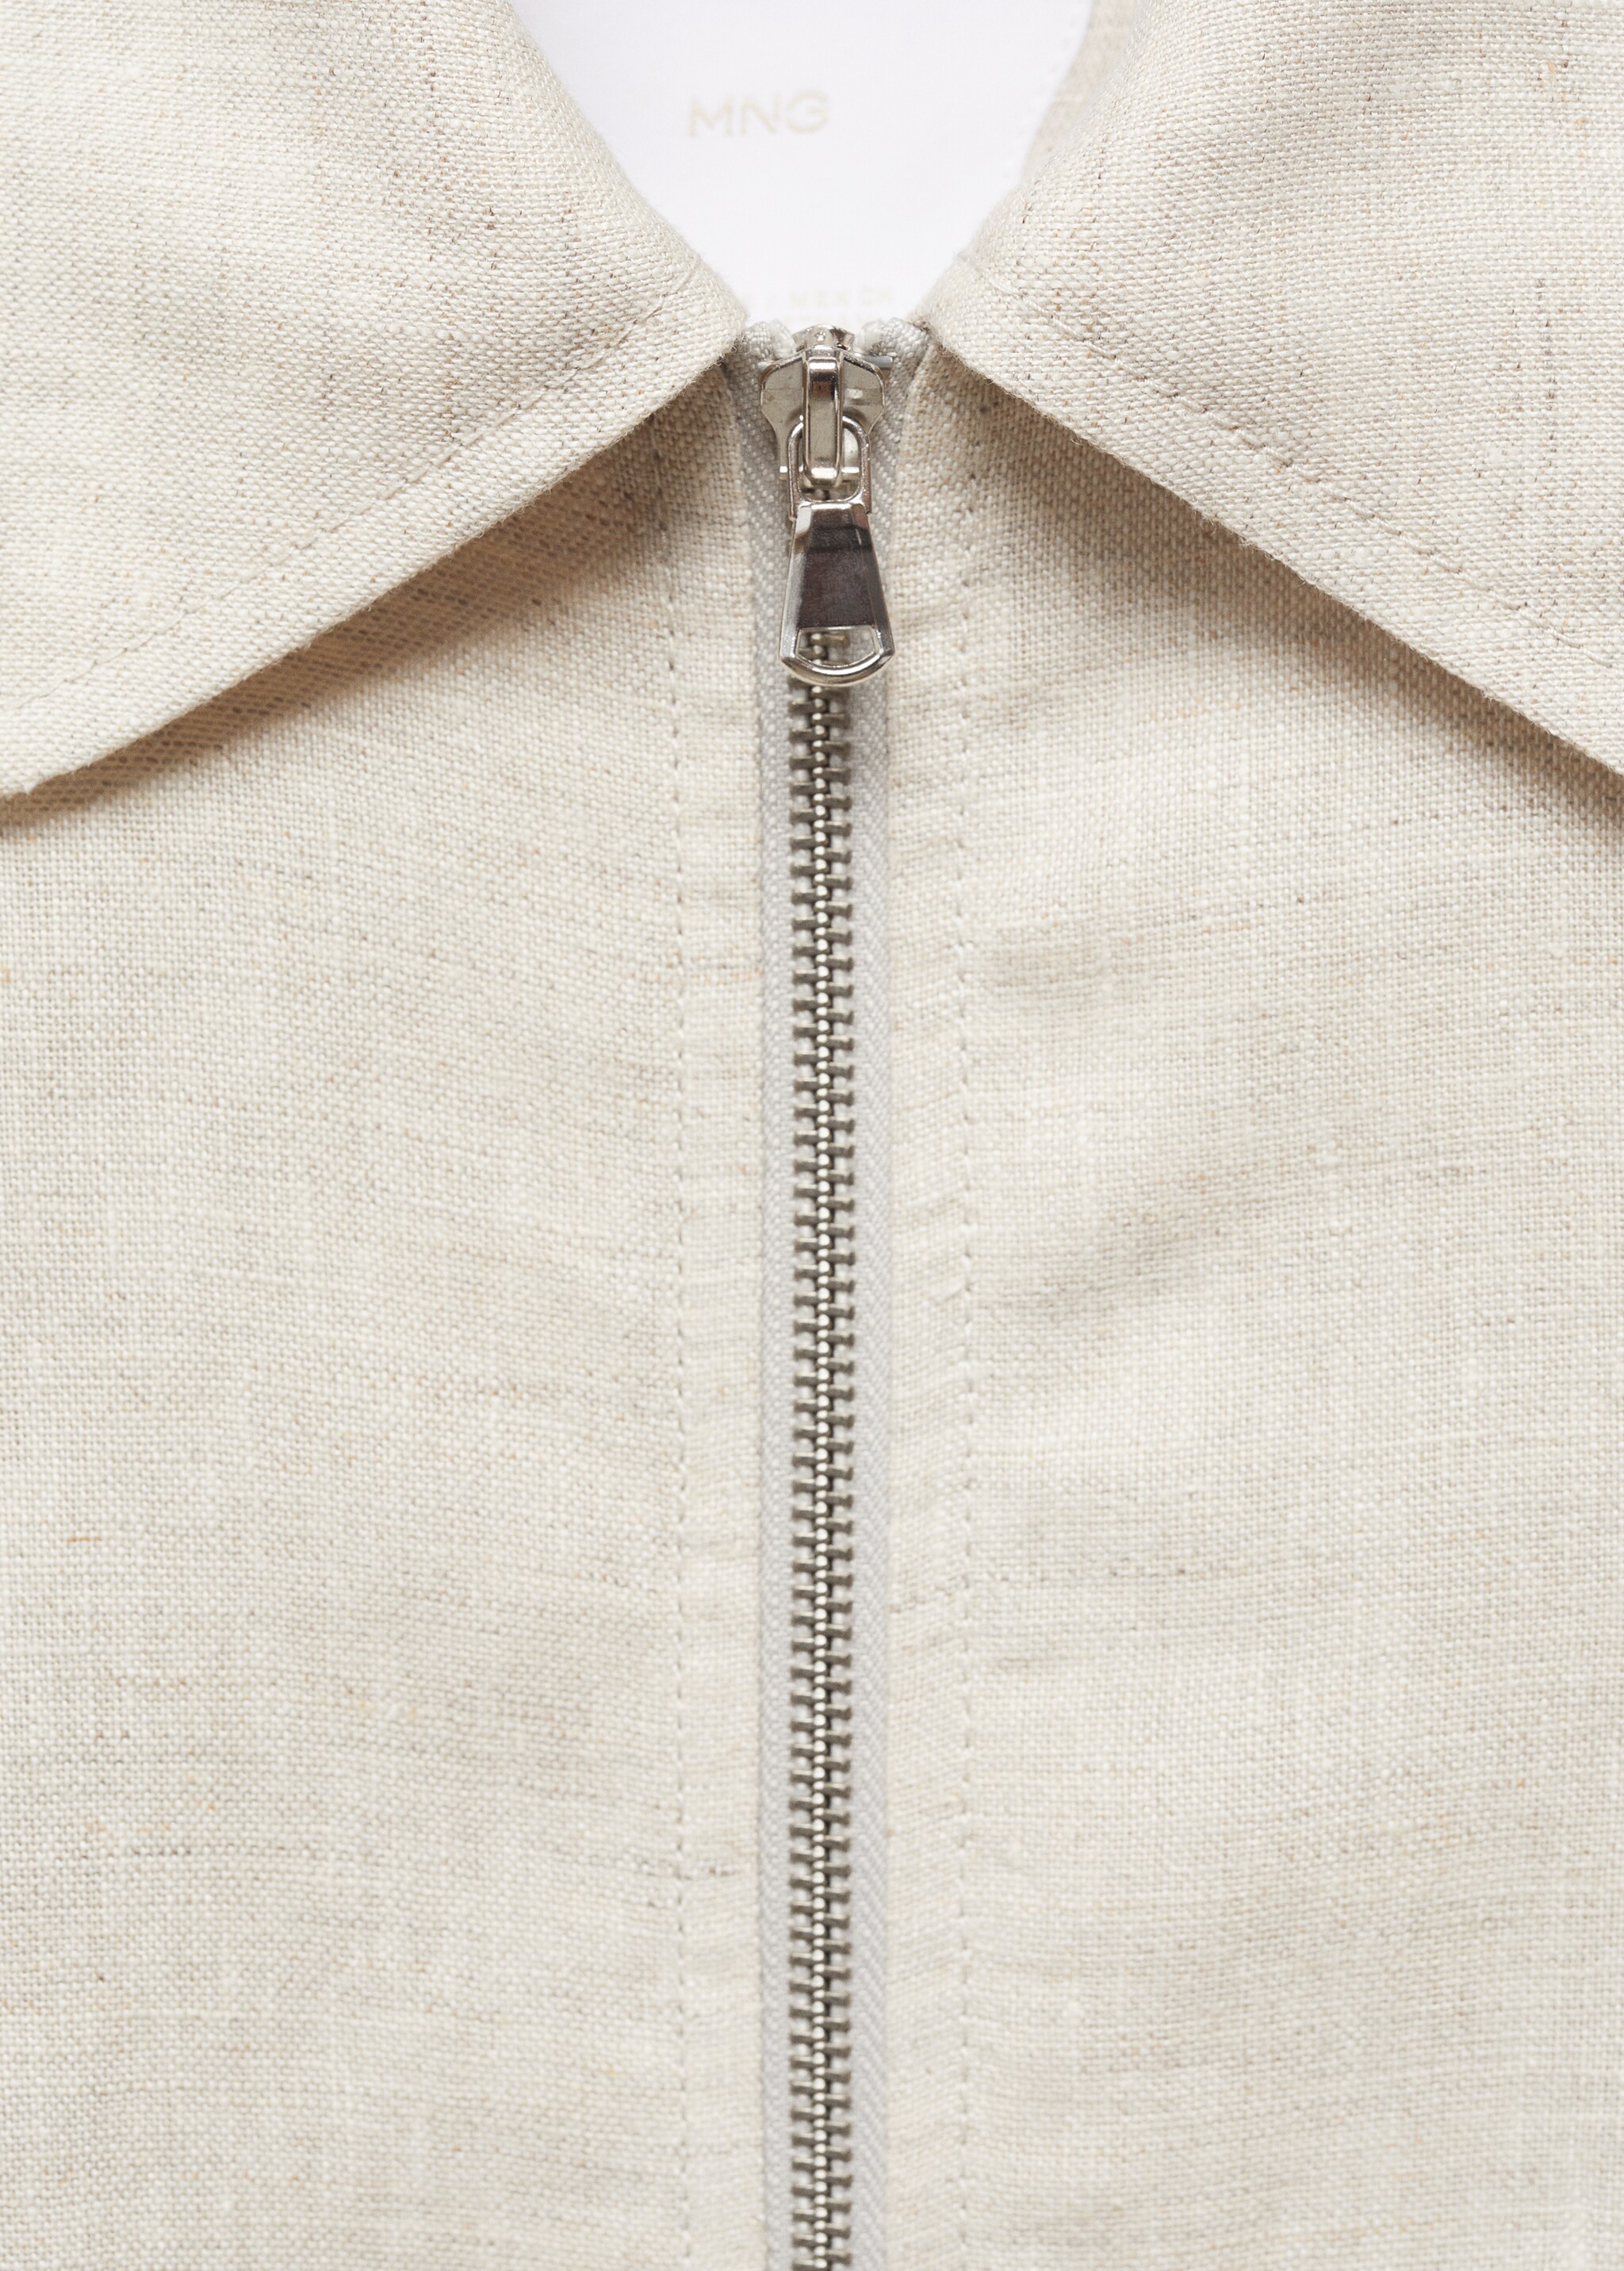 100% linen jacket with zip - Details of the article 8